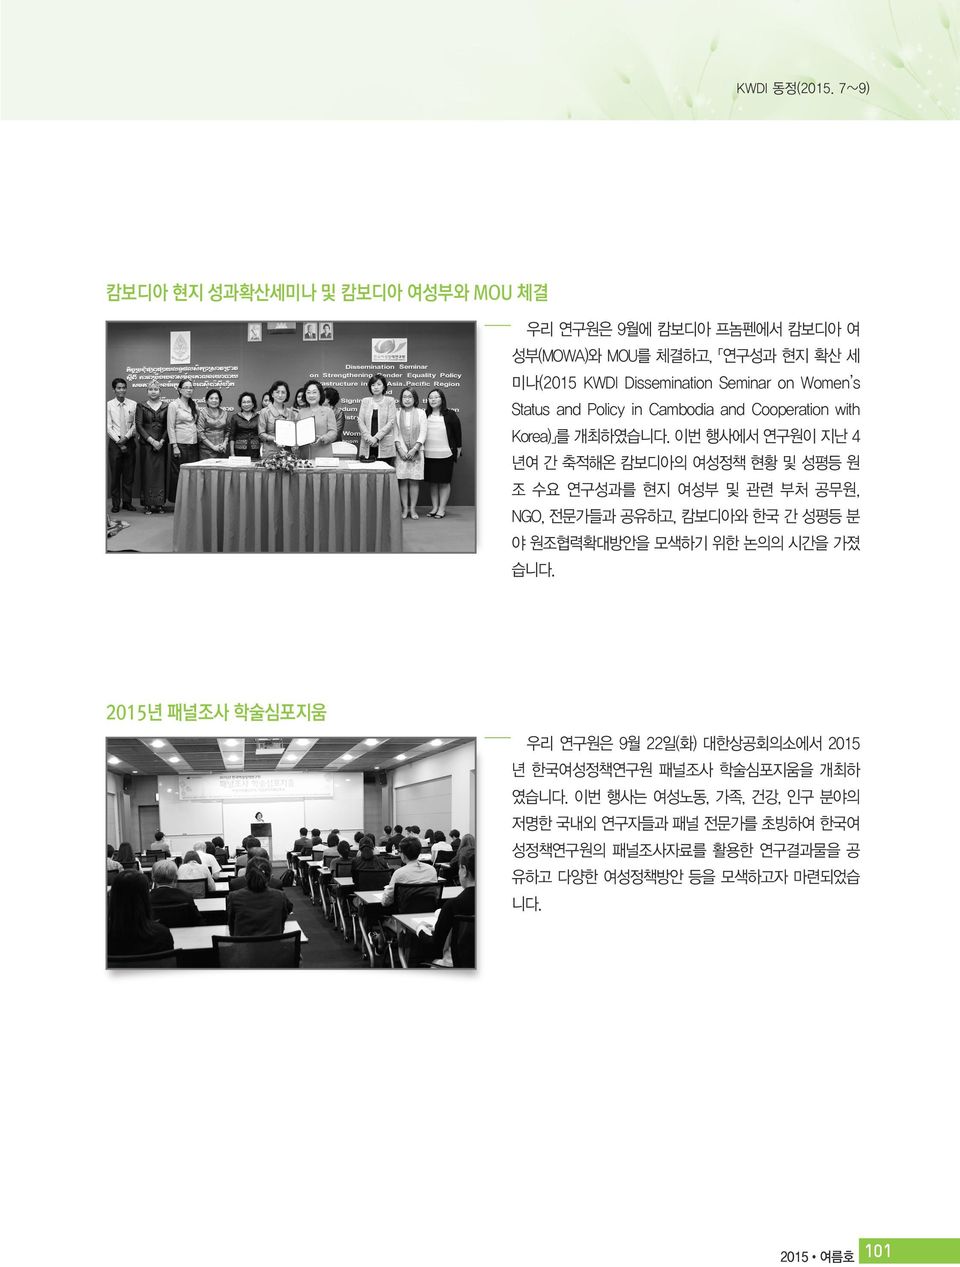 Status and Policy in Cambodia and Cooperation with Korea) 를 개최하였습니다.